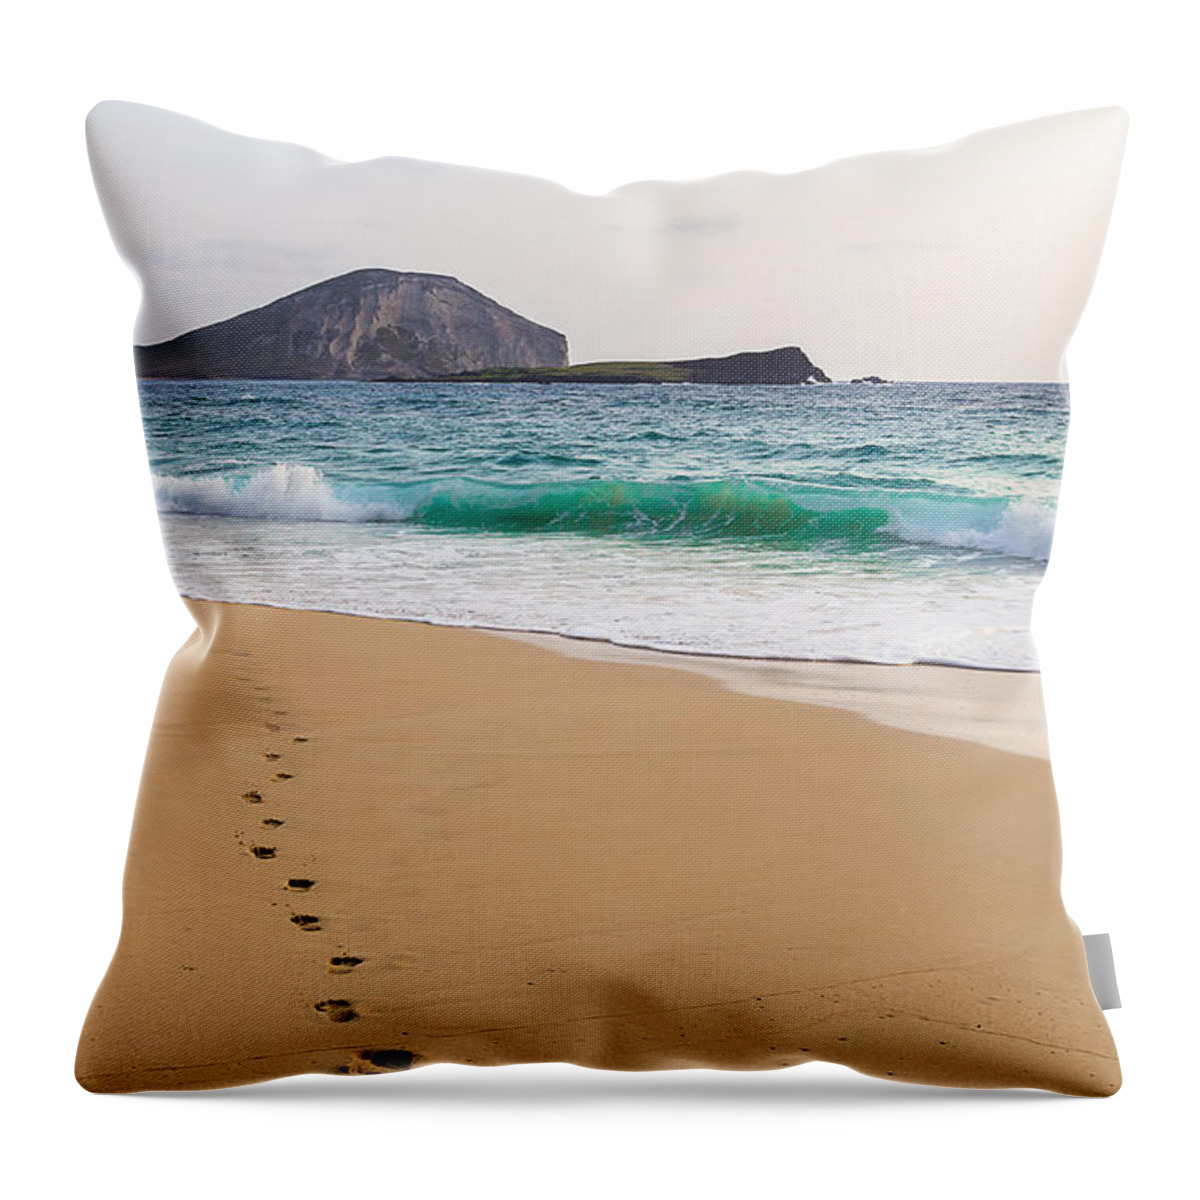 Alone Throw Pillow featuring the photograph Footprints To The Ocean #1 by Leigh Anne Meeks